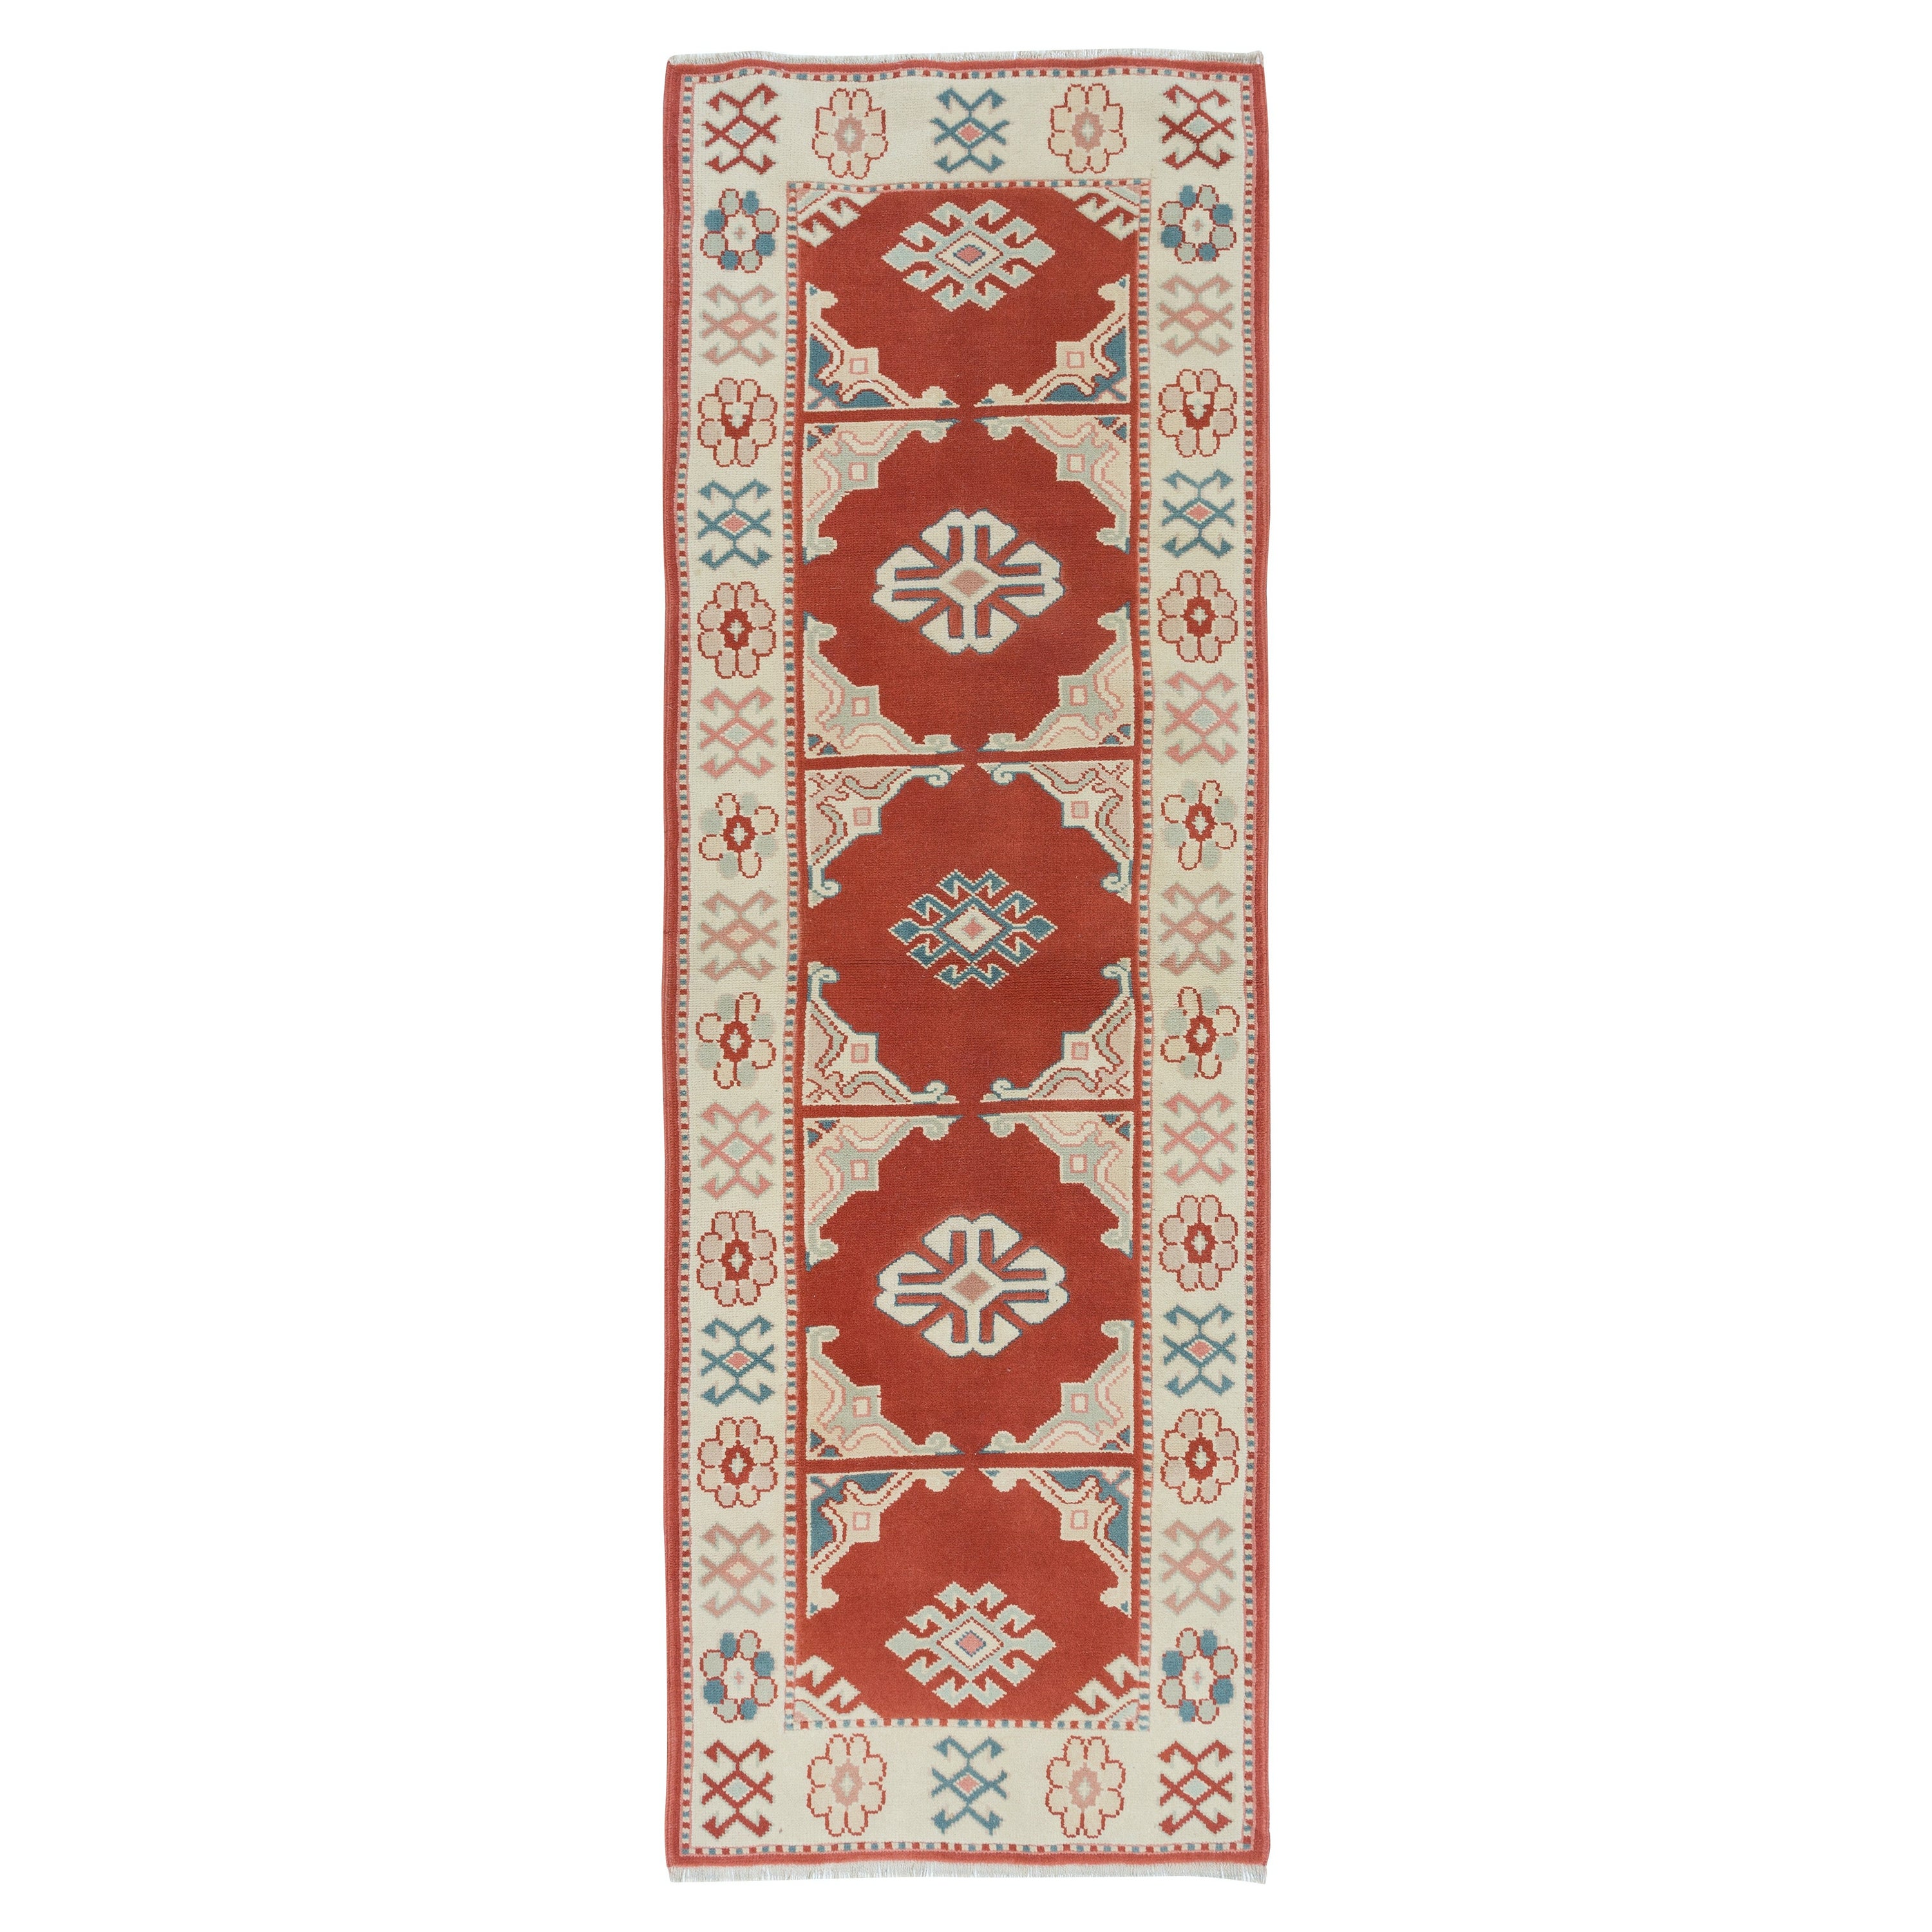 2.5x7.3 Ft One of a Kind Turkish Rug in Red & Beige, Hallway Runner, 100% Wool For Sale